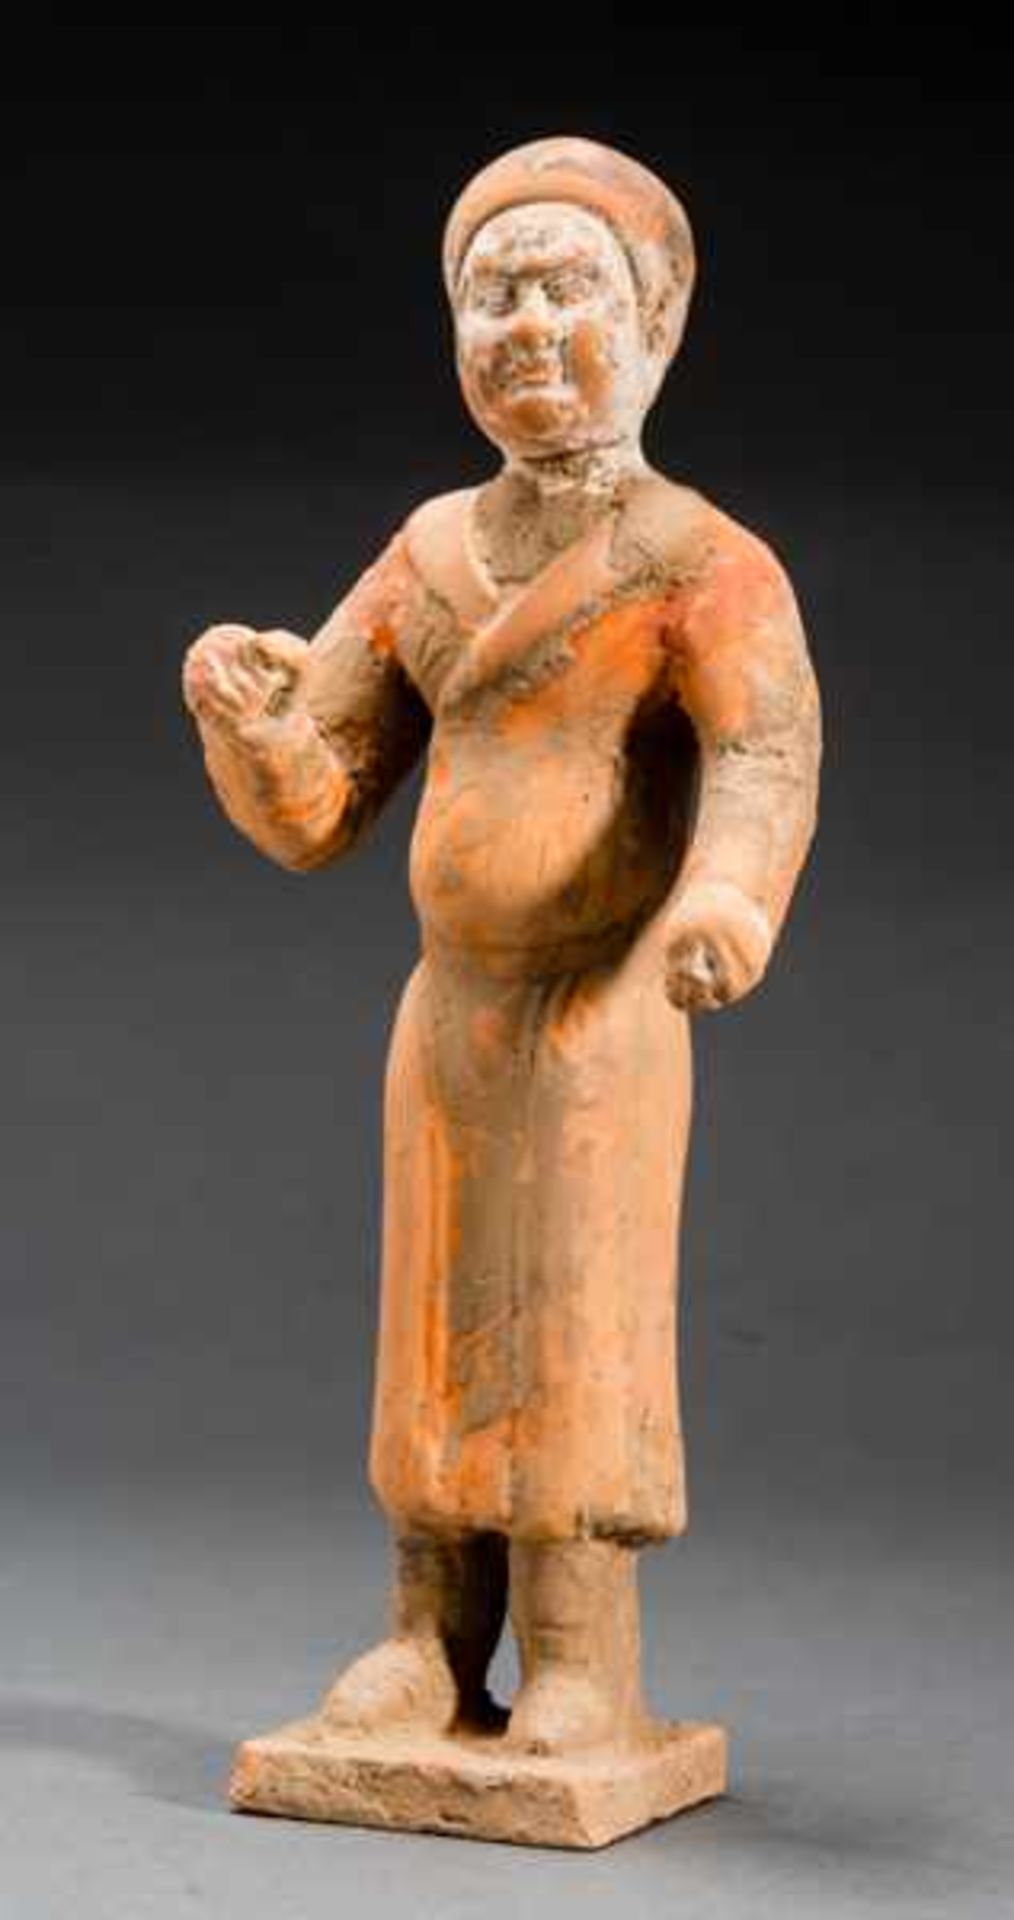 STANDING FIGURE Terracotta with remnants of original painting. China, Six Dynasties (221 - 589) - Image 2 of 6